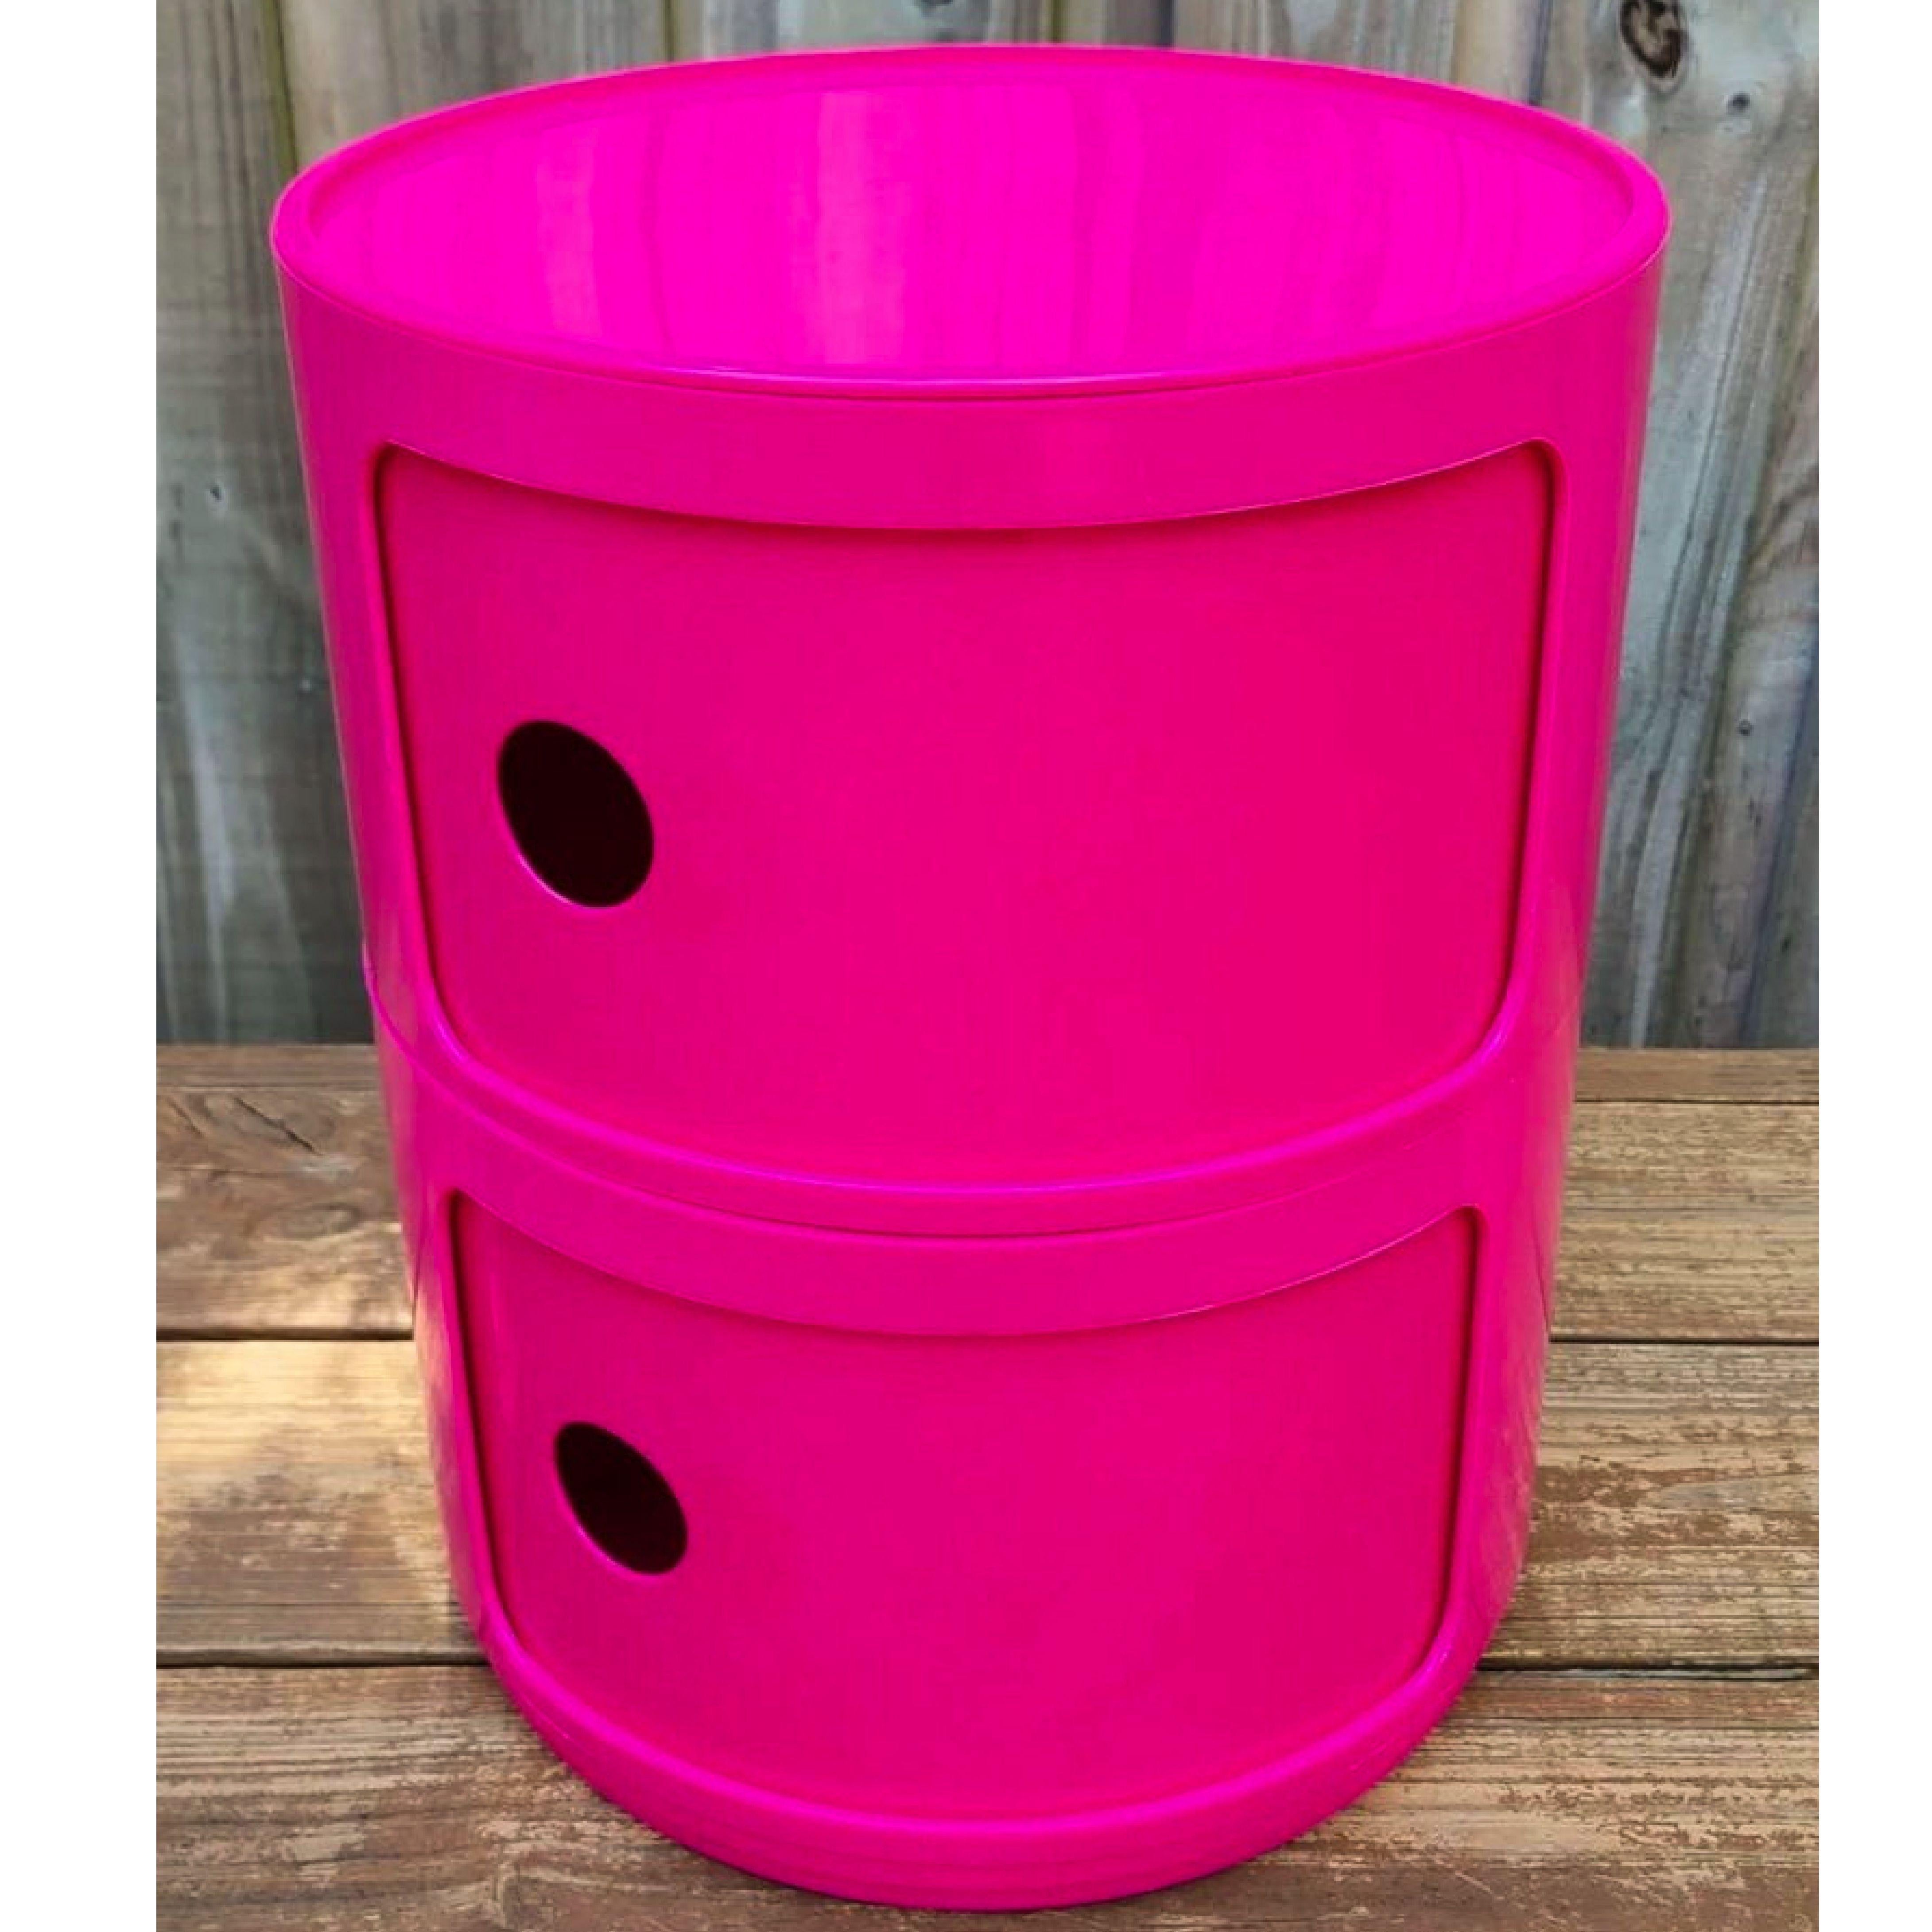 Rare Componibili storage unit components in vibrant hot pink. Will come with 2 “body” units and 1 “top” 
The Componibili Storage Unit (1969) takes its name from componibile, Italian for “modular,” consisting of individual storage modules equipped